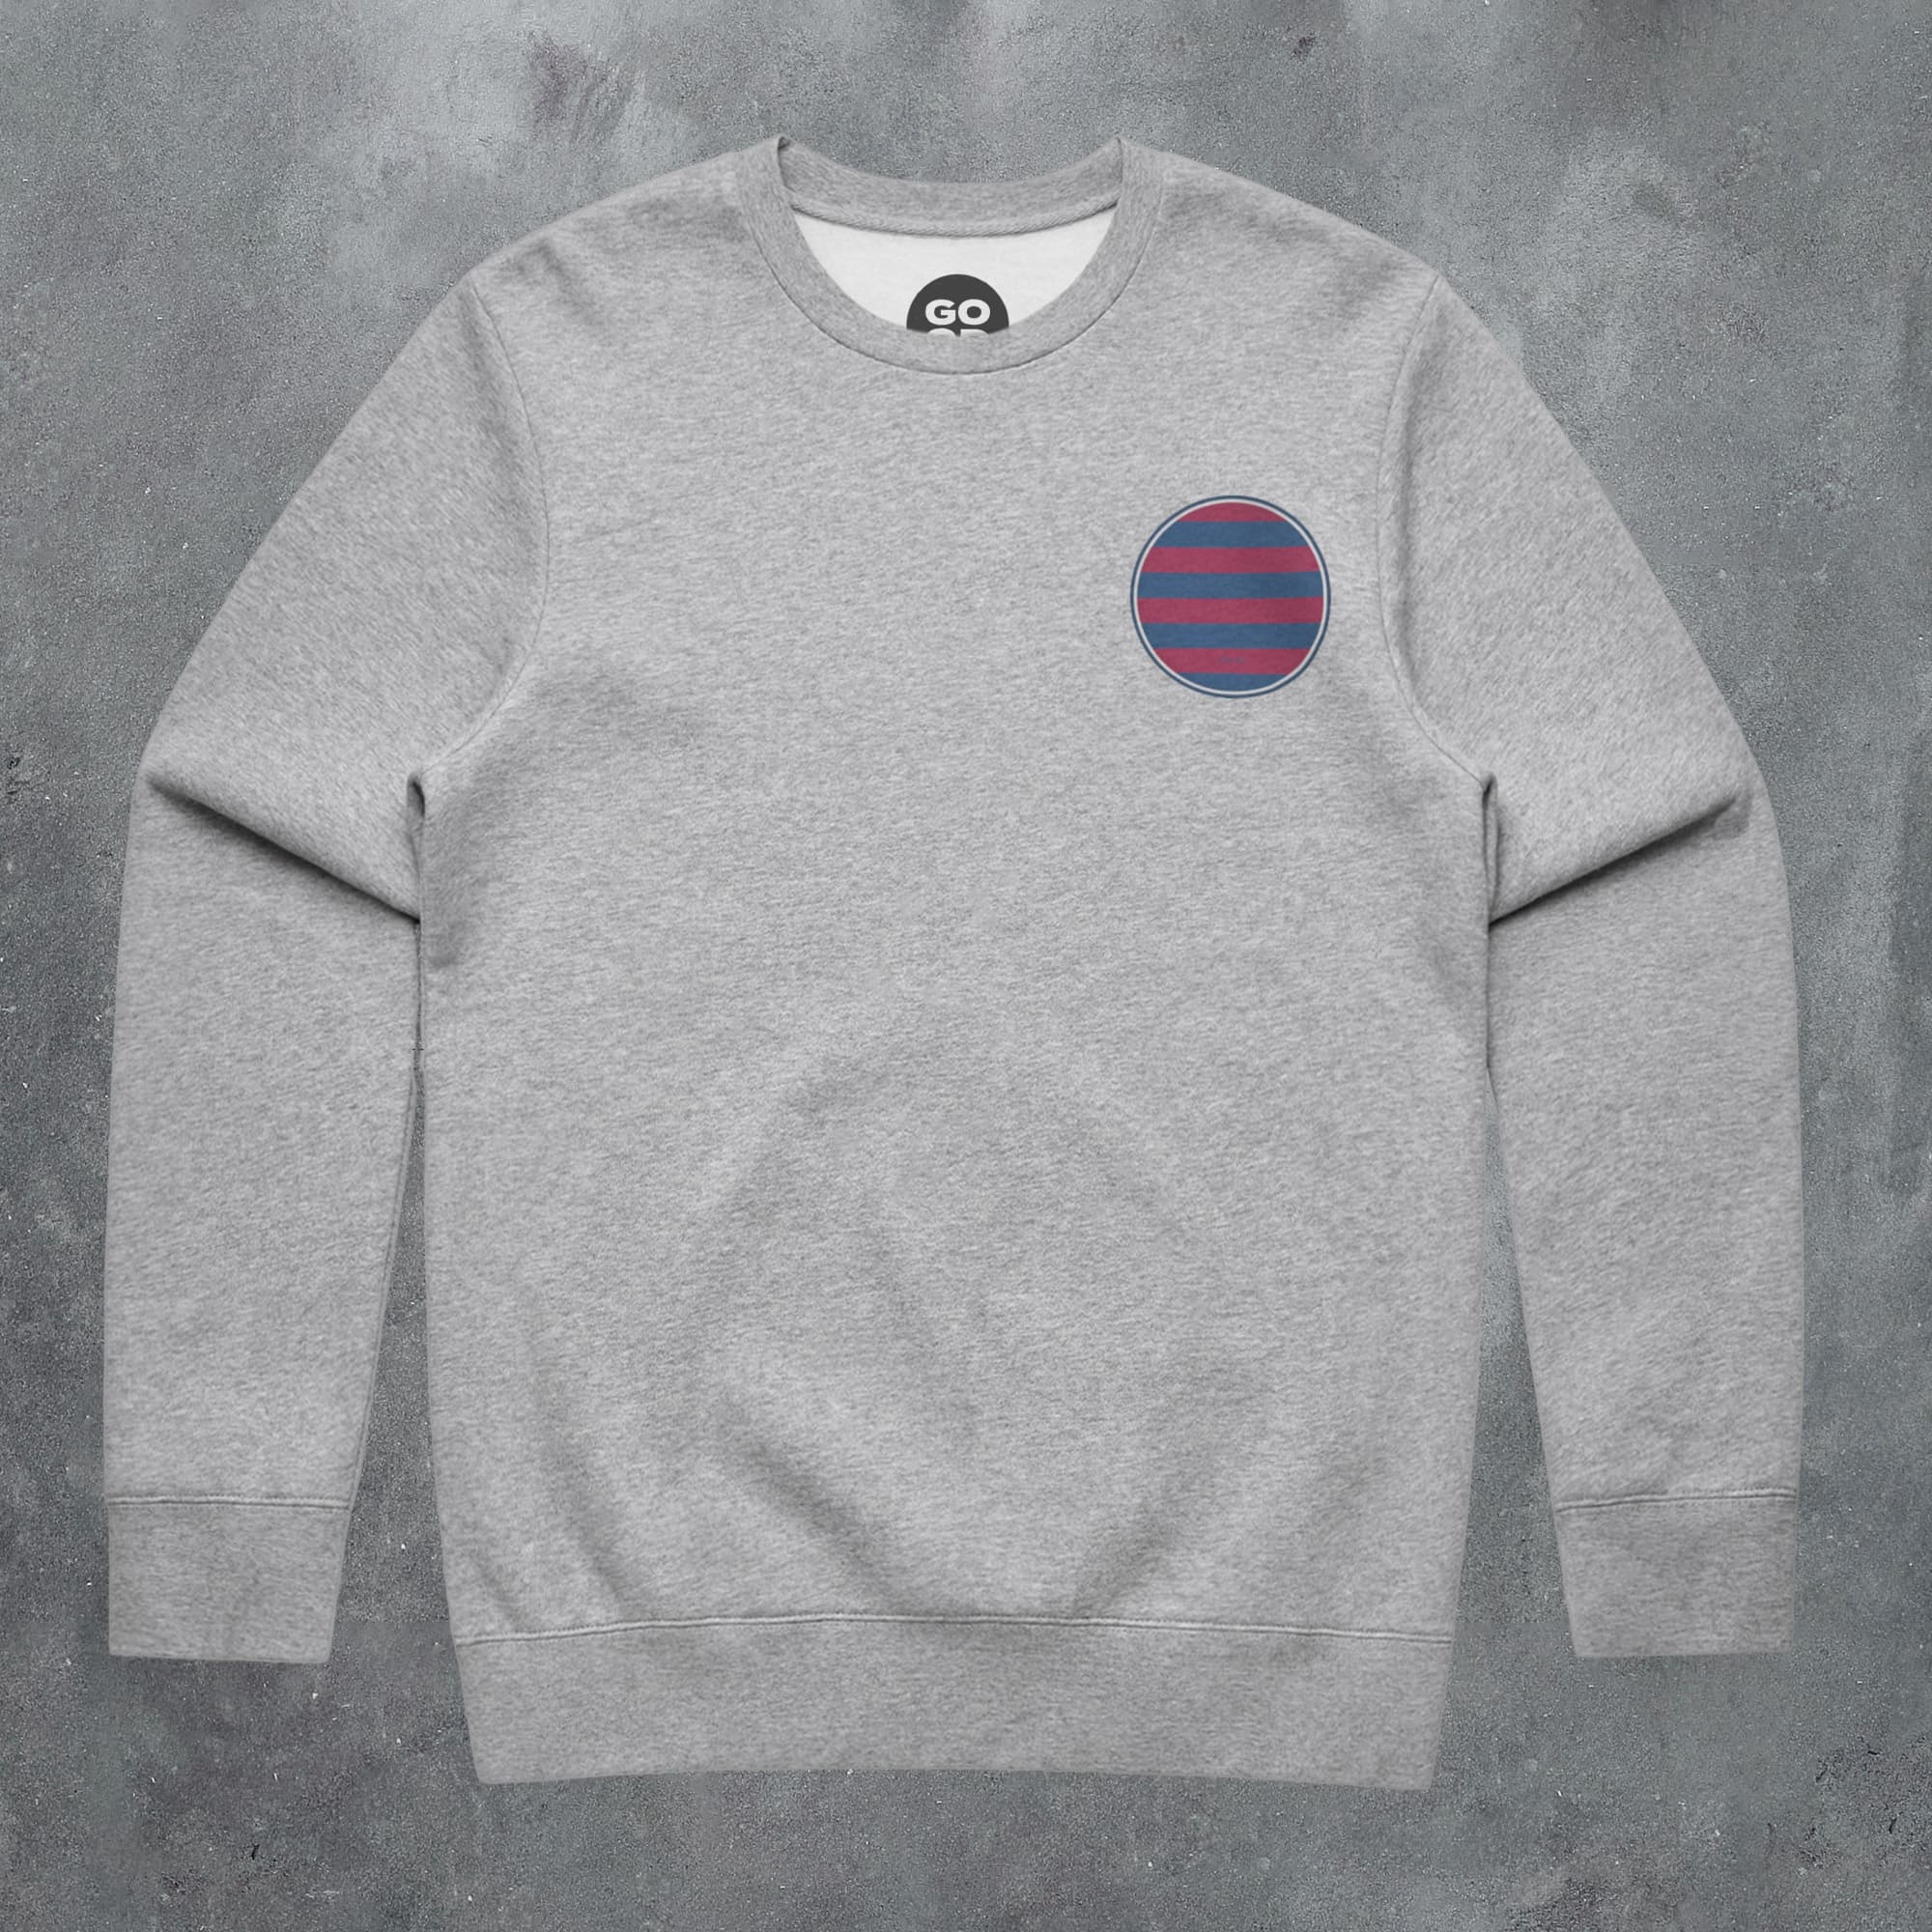 a grey sweatshirt with a blue and red stripe on the chest